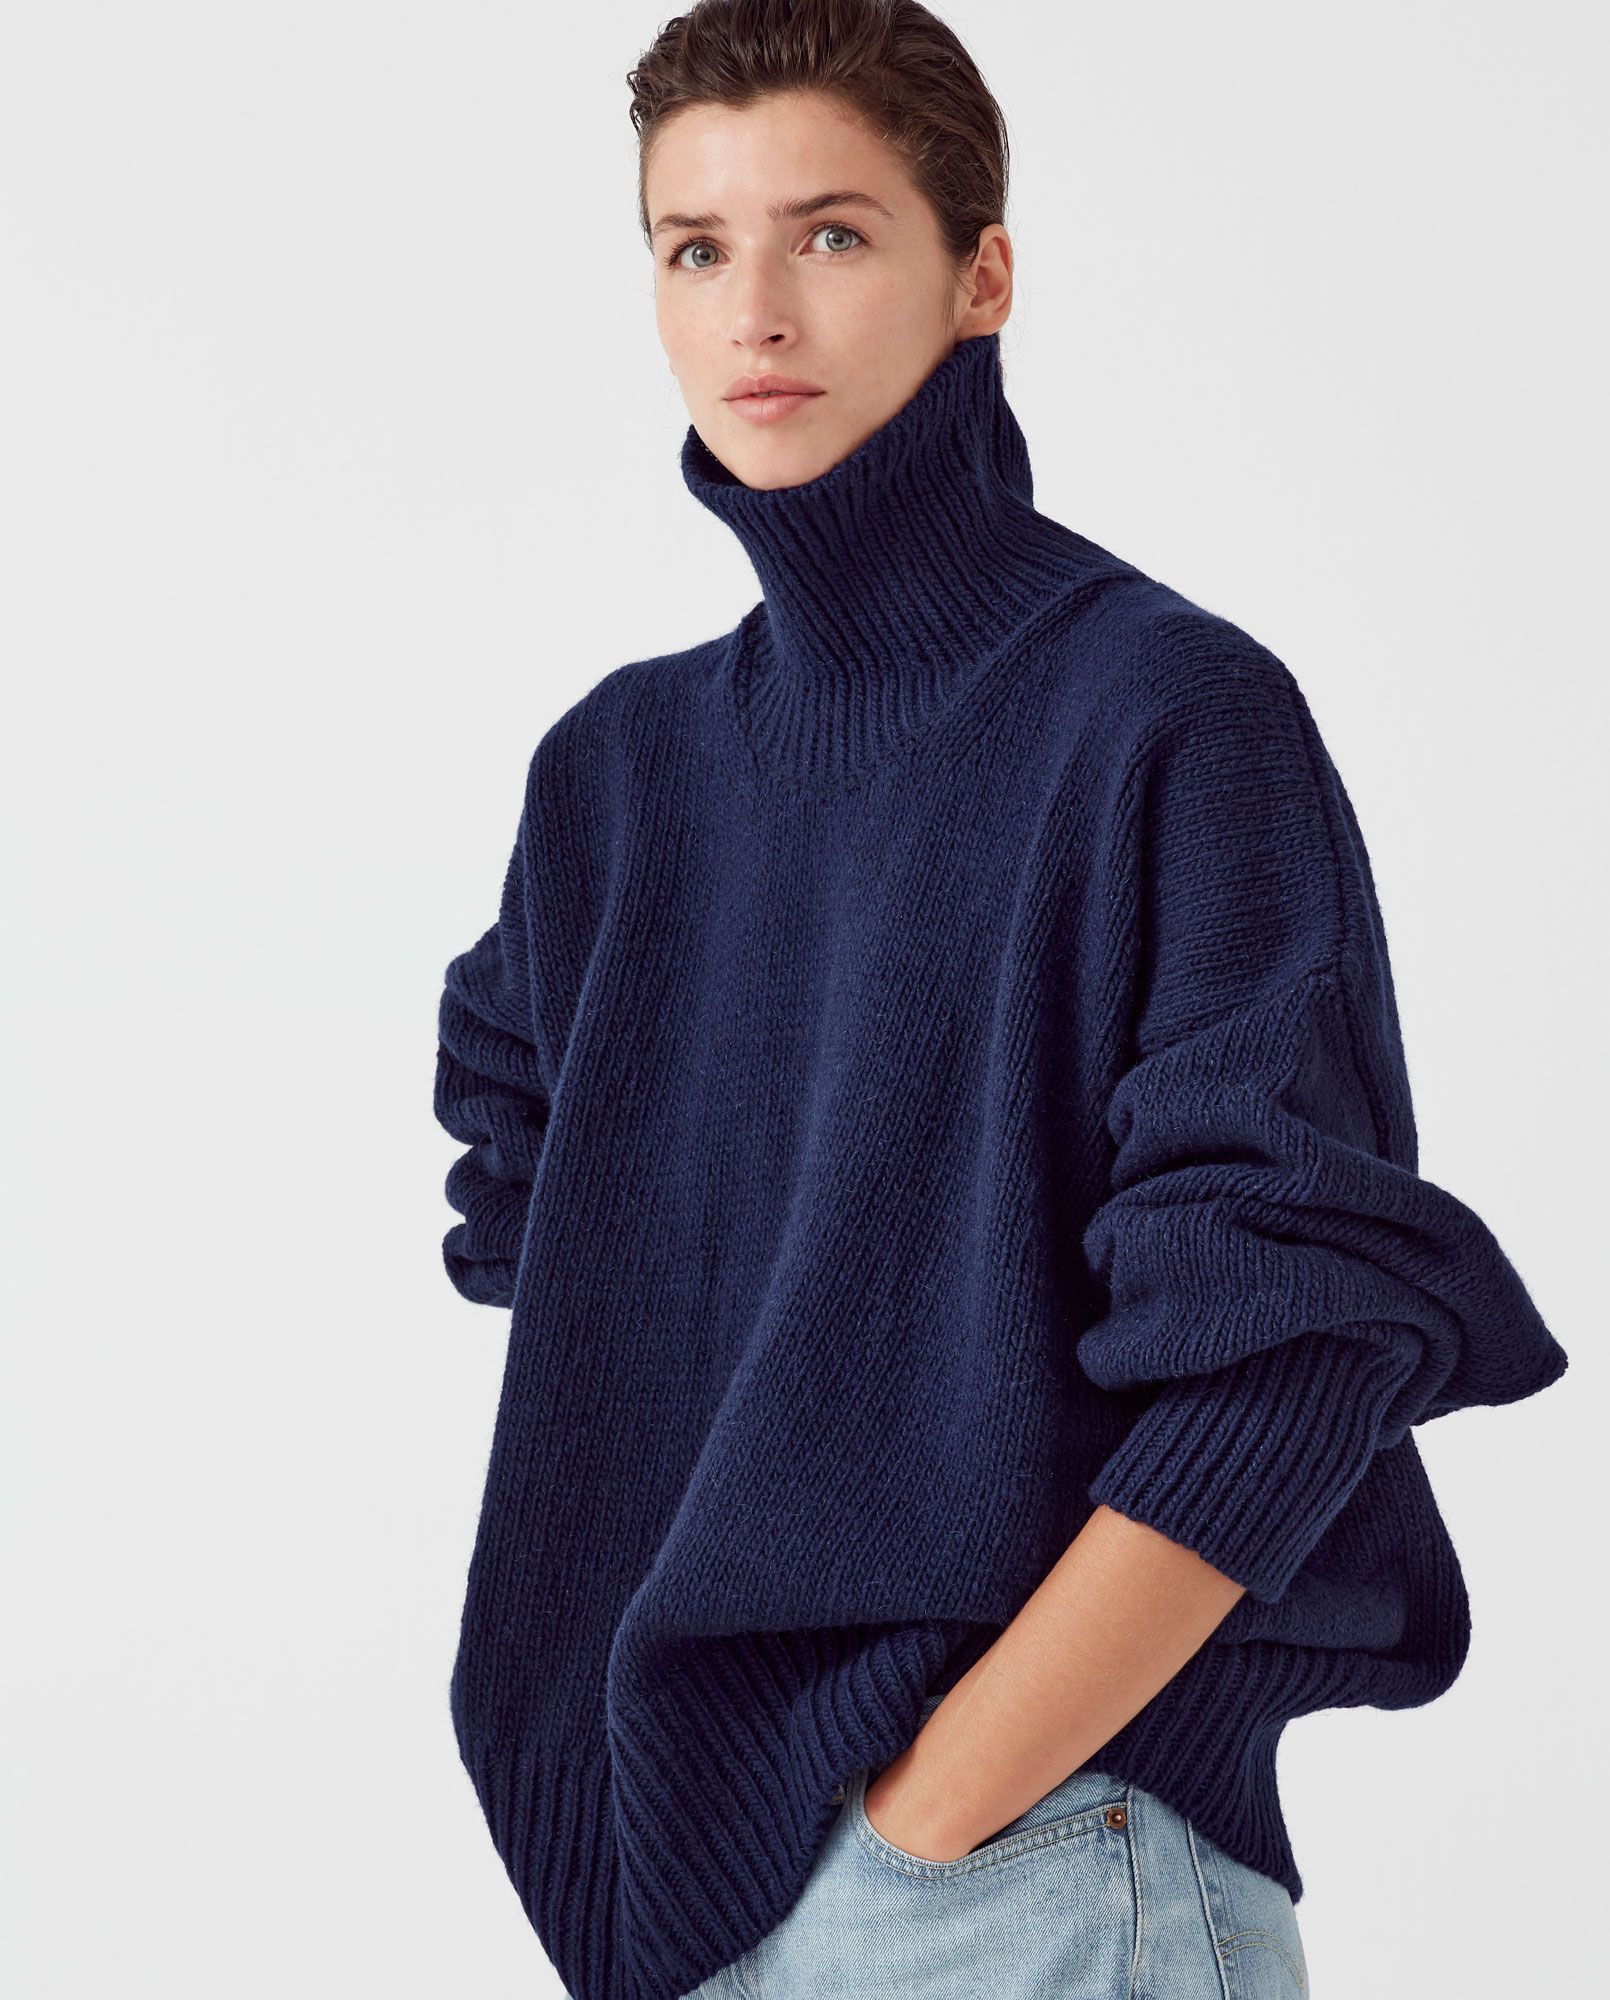 The 27 Best Turtlenecks for Women That Look So Stylish | Who What Wear